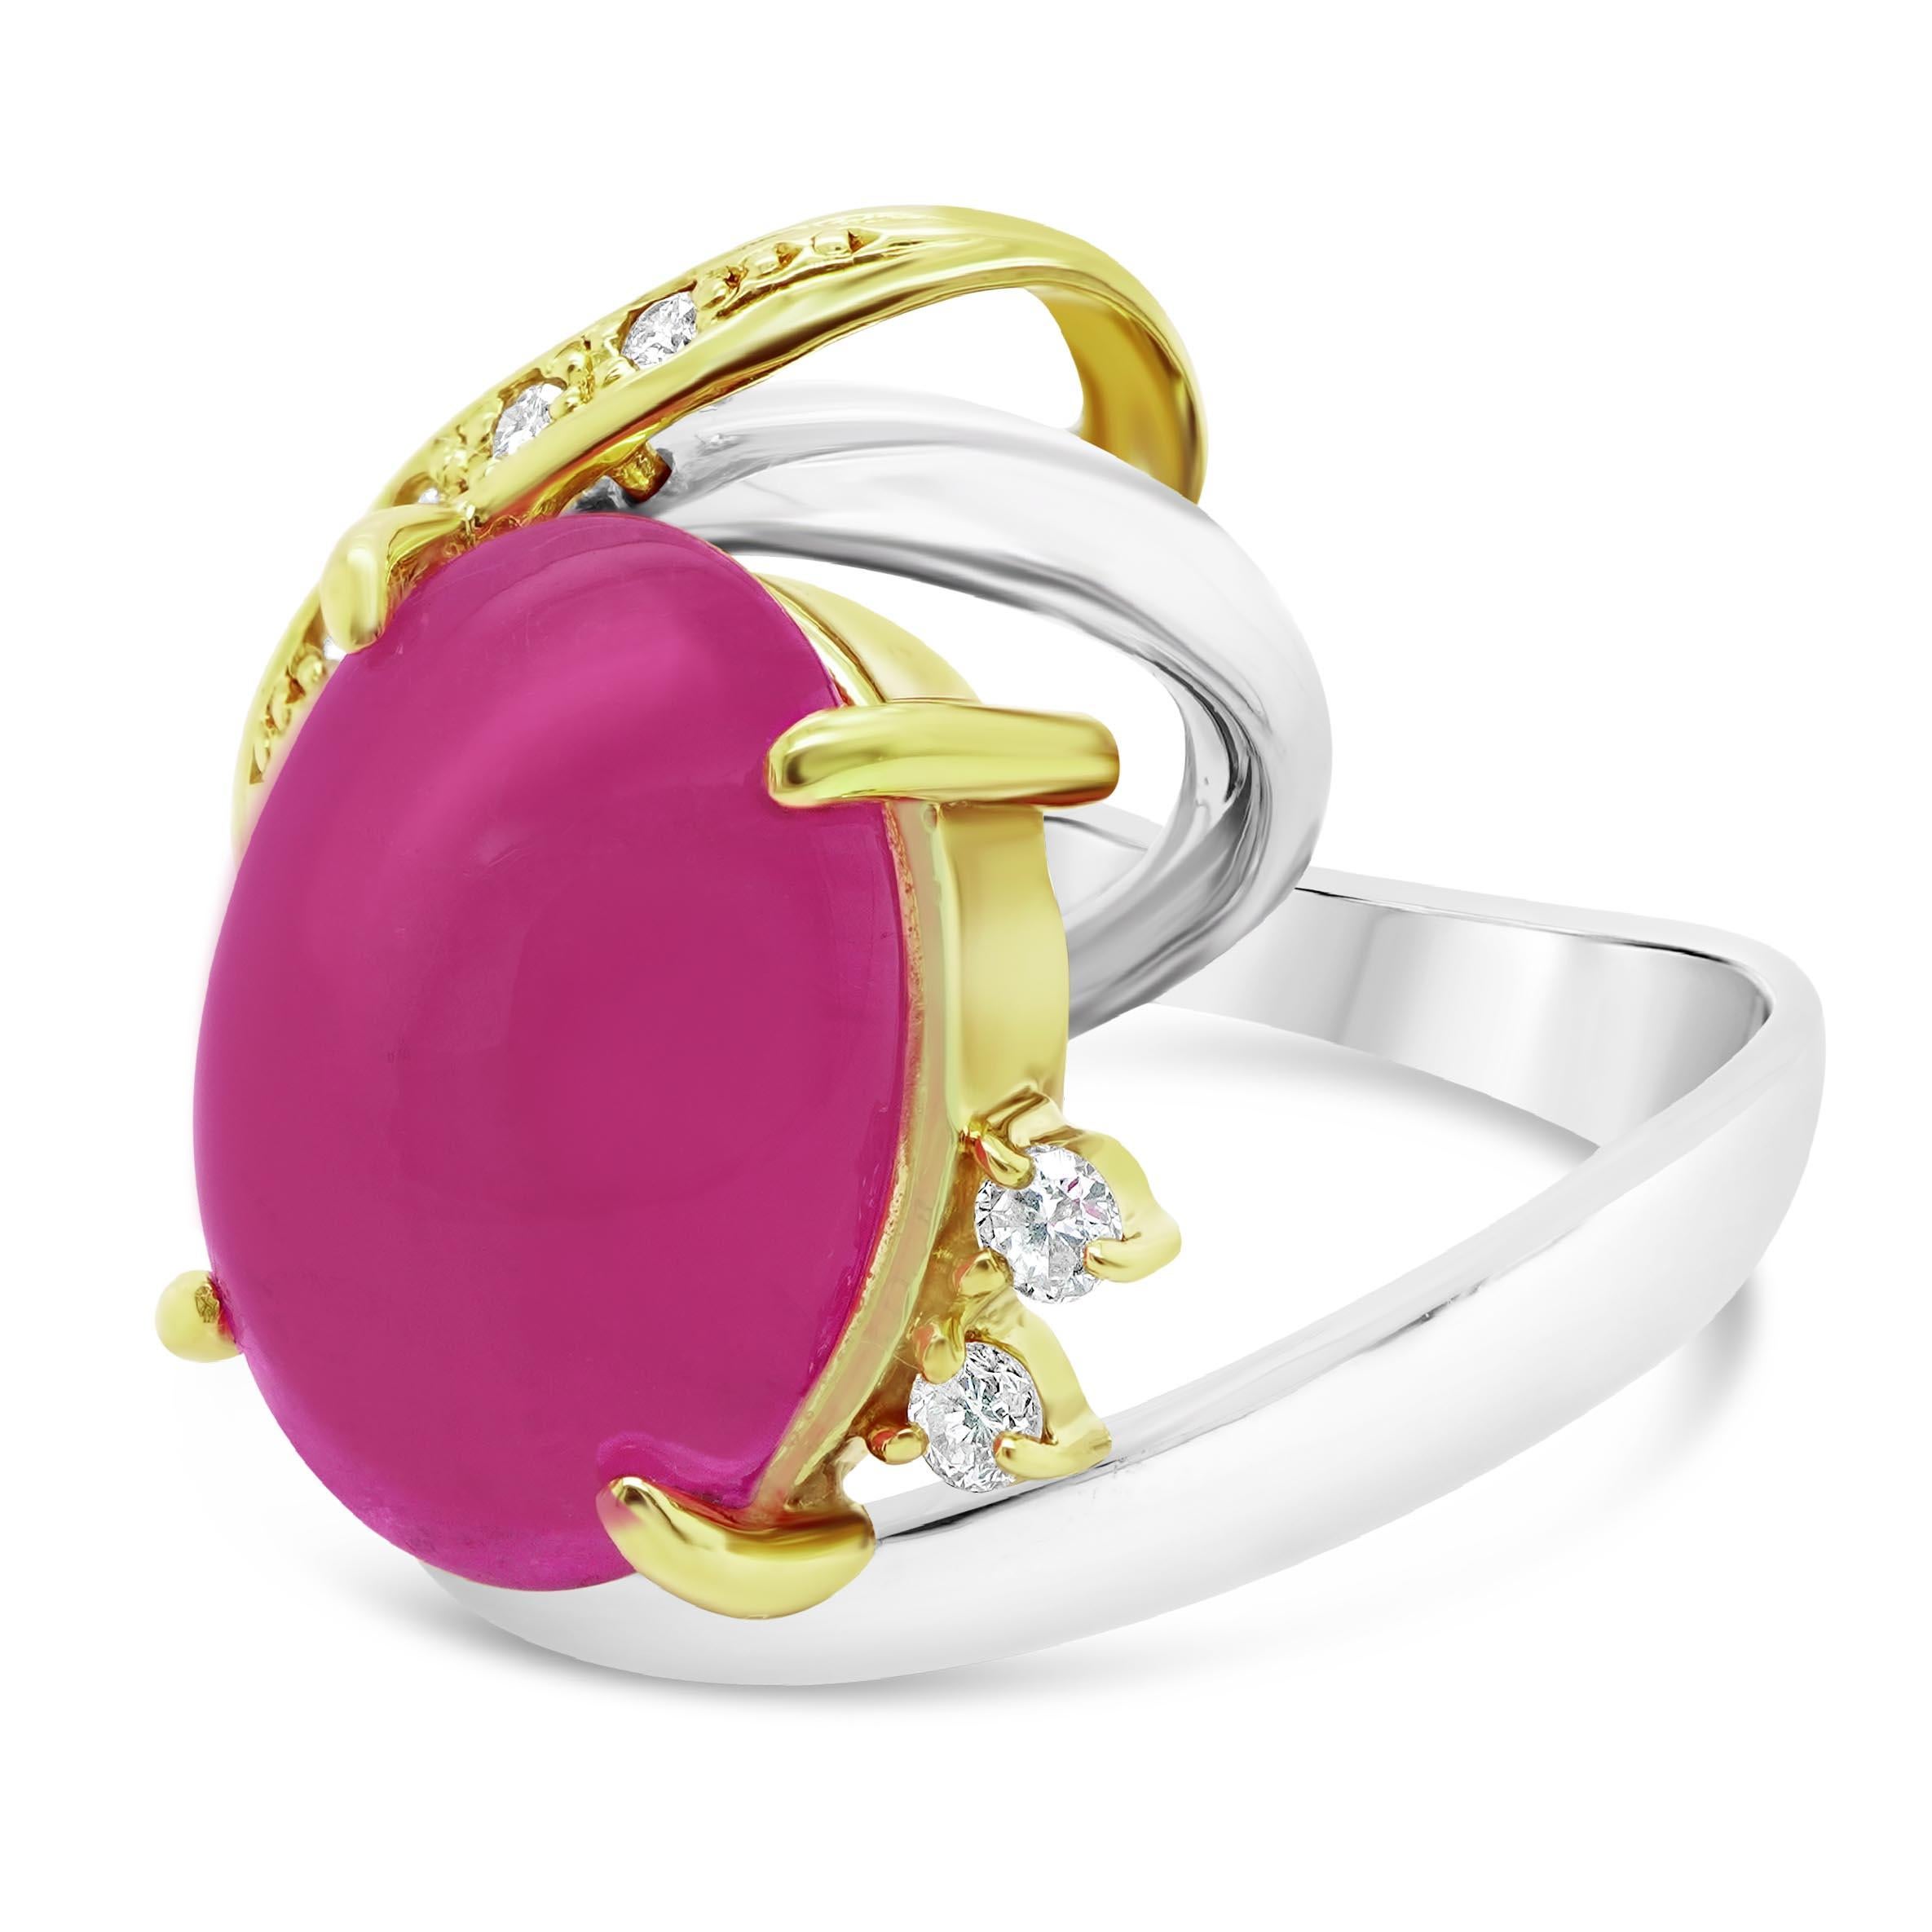 Pink sapphires are made up of the mineral corundum that is colored by trace elements of chromium. This is how they get their beautiful color. If the chromium content is high then you get a deeper red color, which in turn makes the stone a ruby.
The